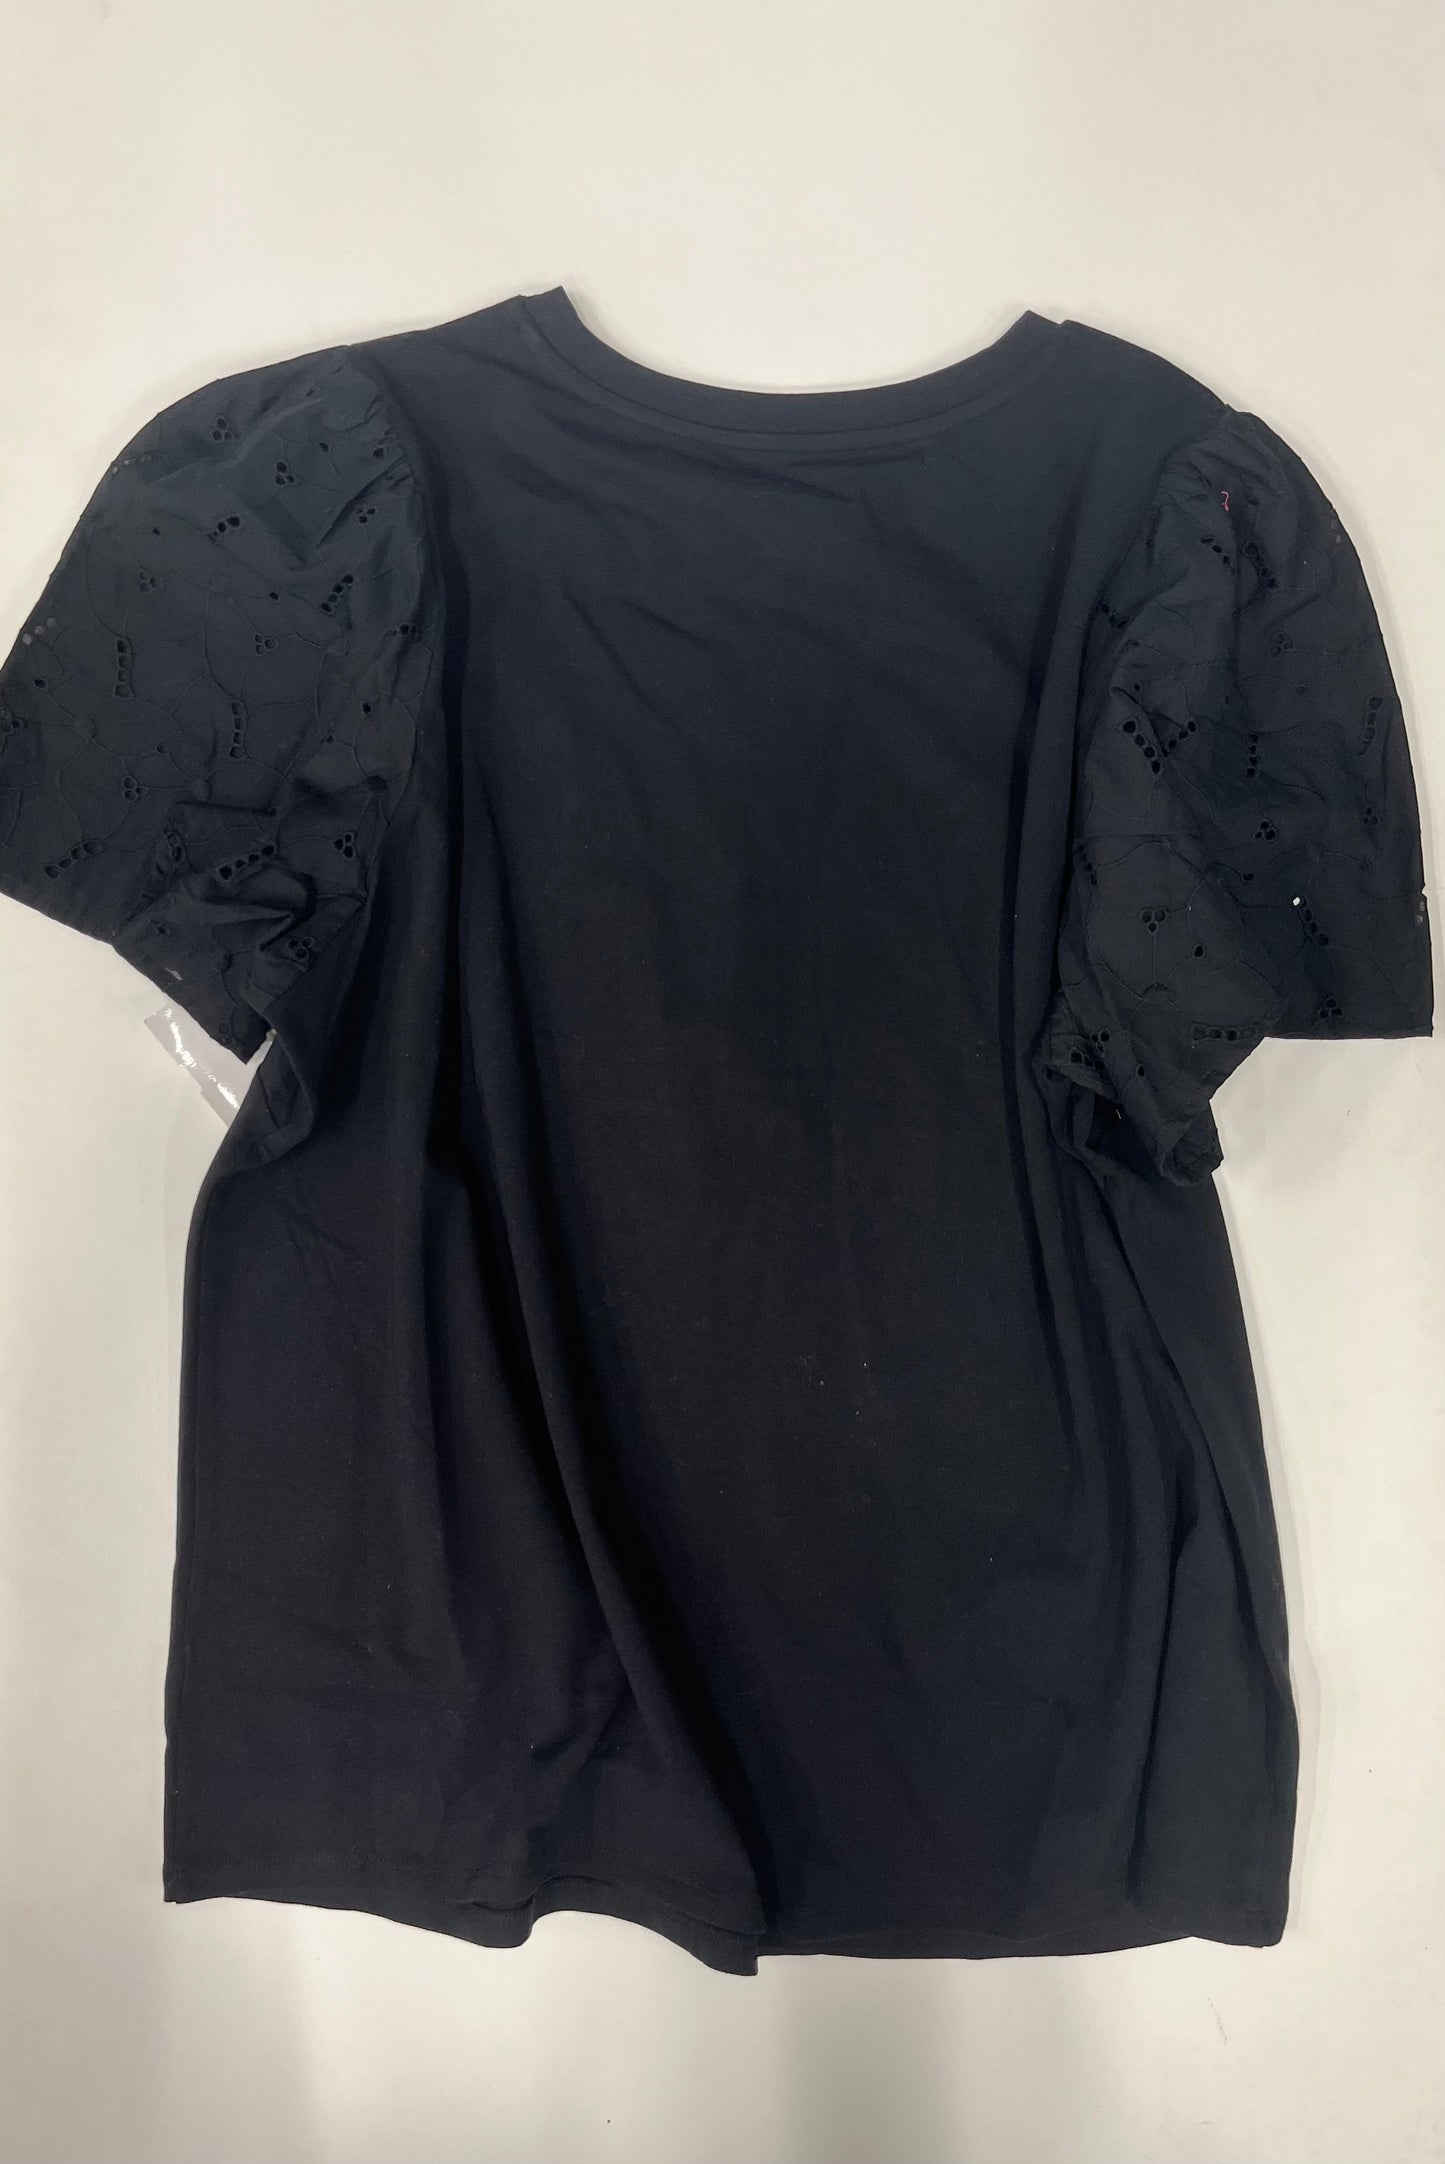 Top Short Sleeve By A New Day  Size: 2x